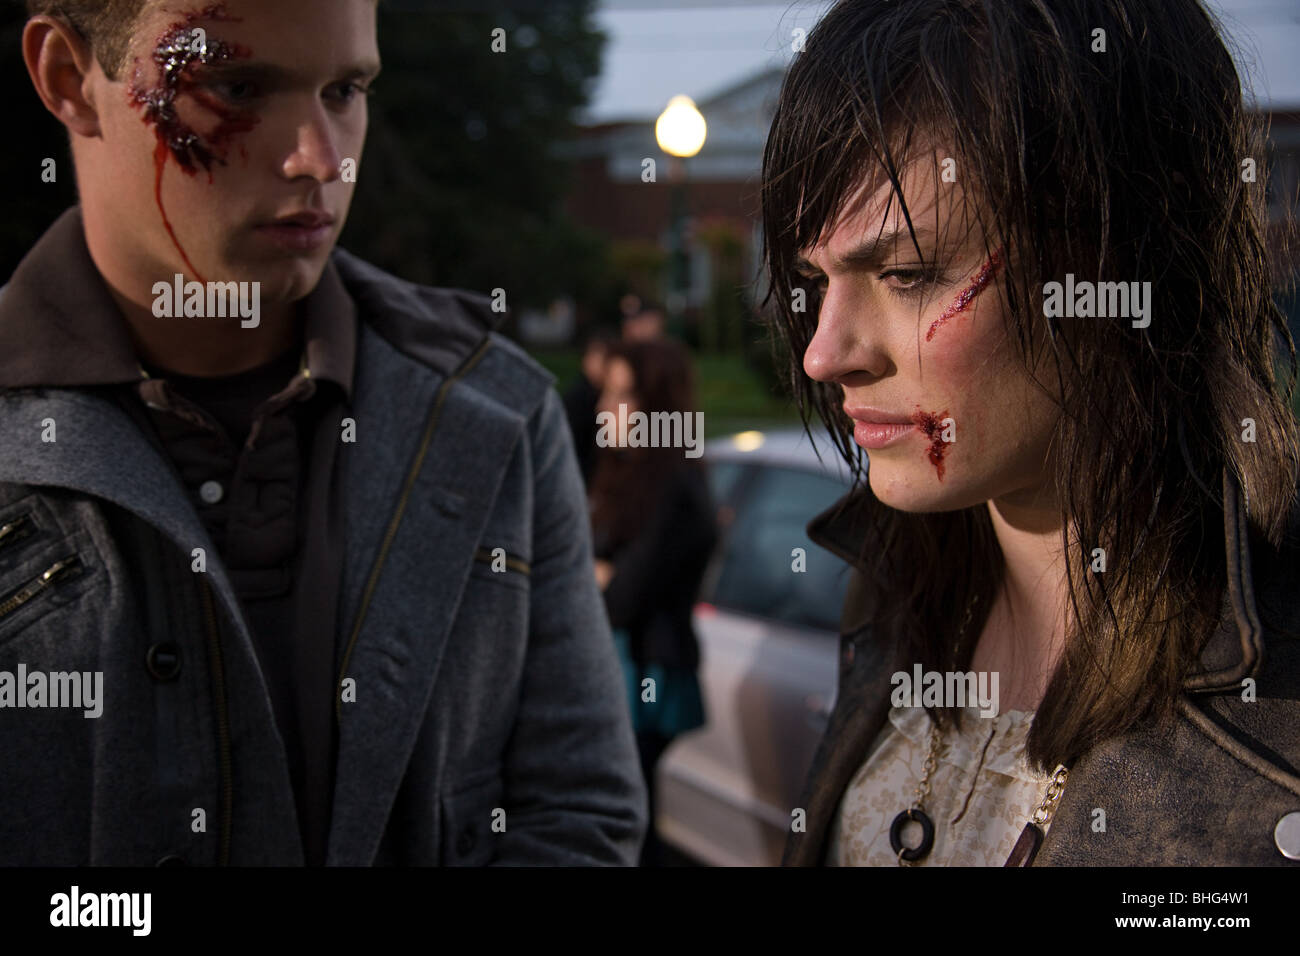 Young couple involved in road accident Stock Photo